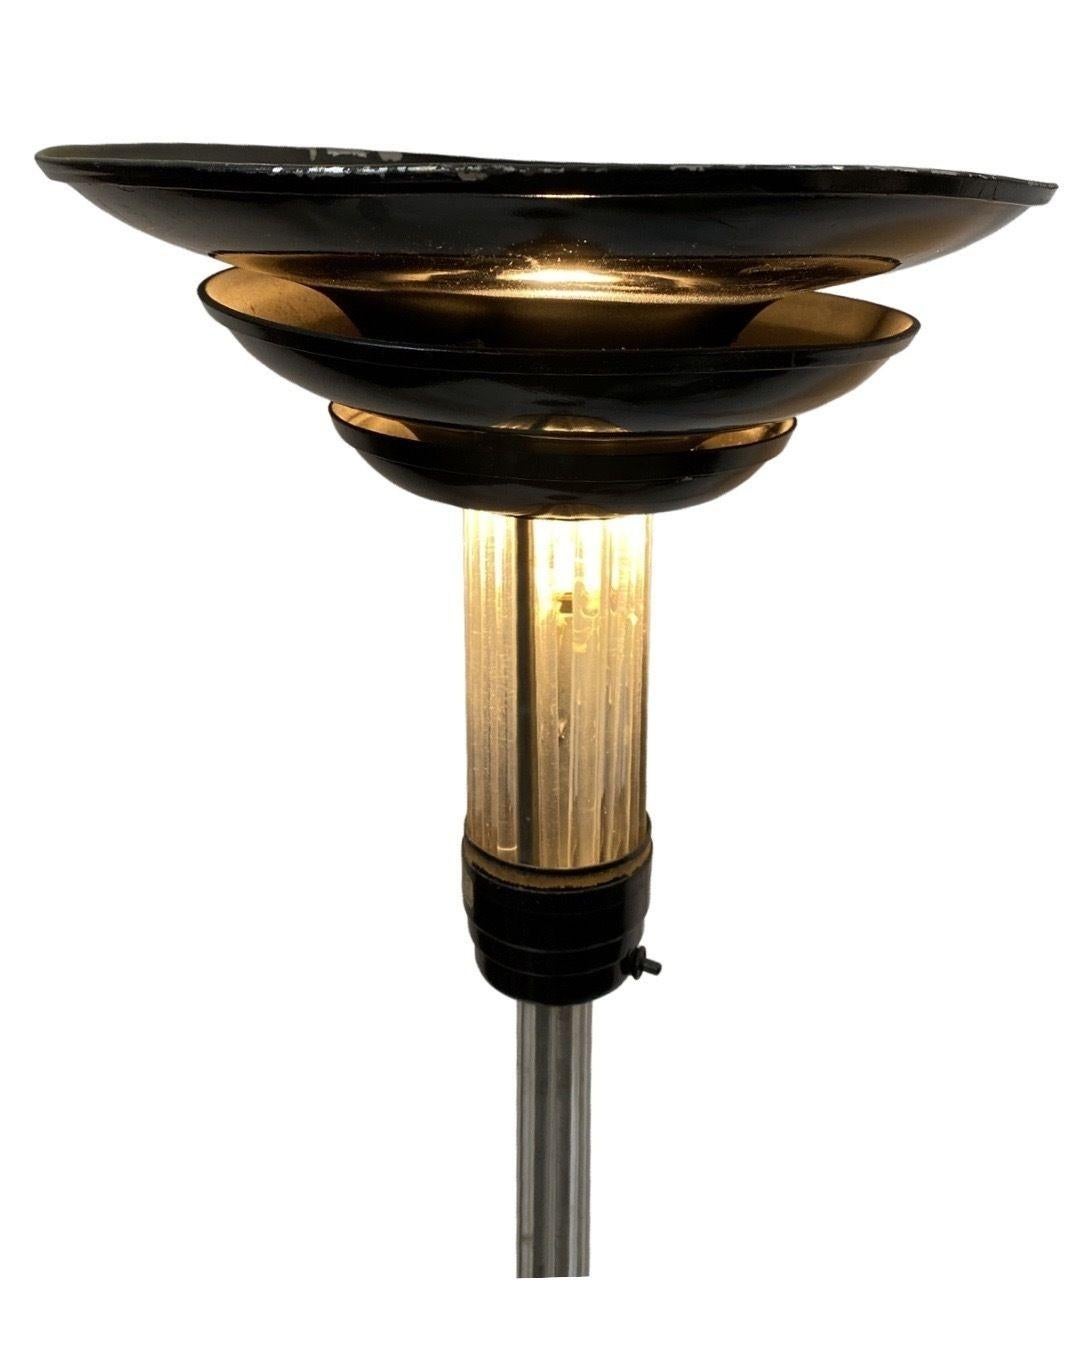 Streamline Art Deco Glass Rod Torchiere Floor Lamp w/ 3 Tier Spun Aluminum Shade In Good Condition For Sale In Van Nuys, CA